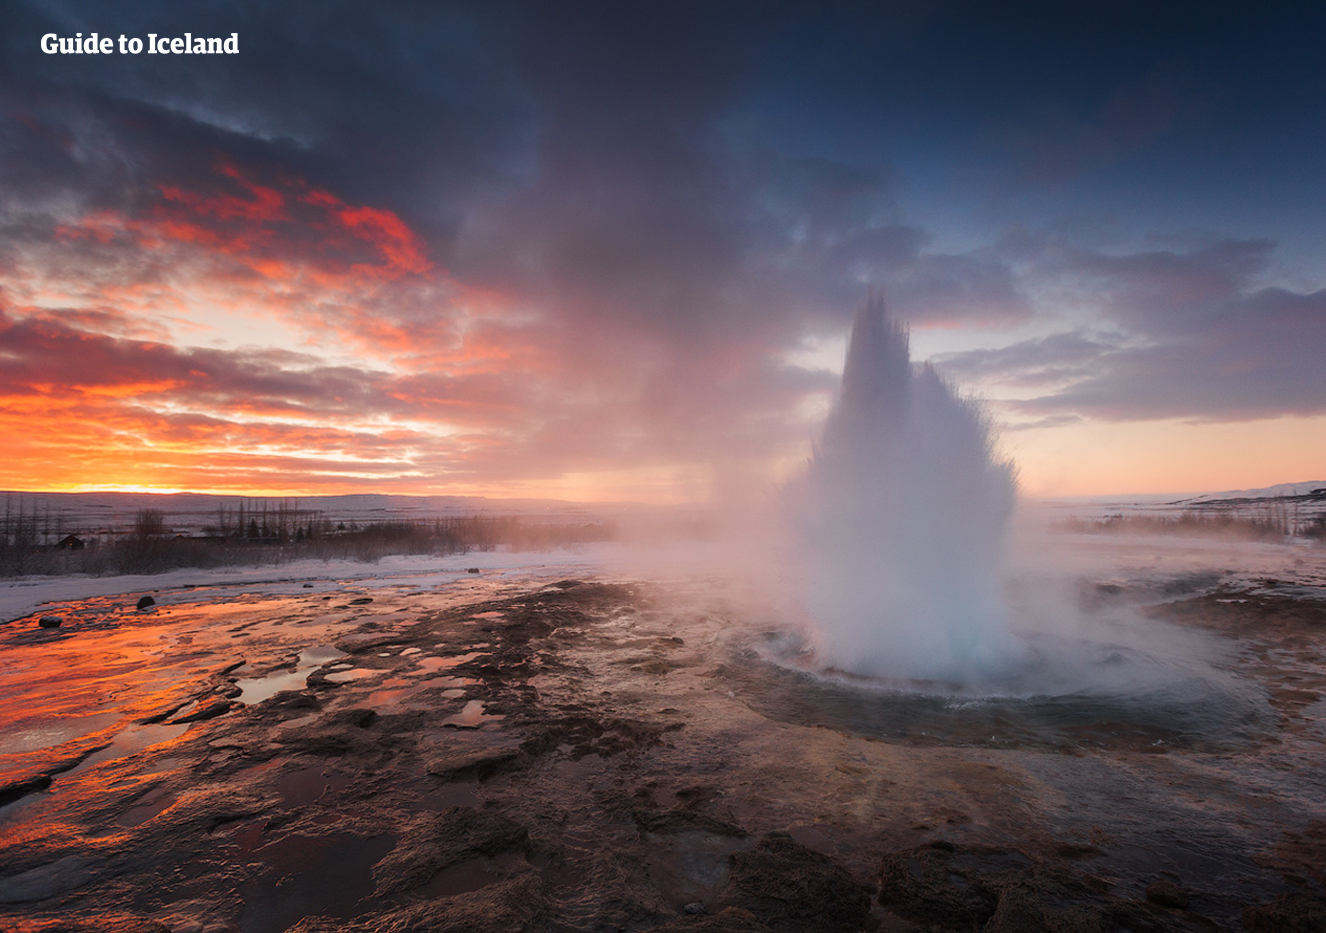 The most active geyser in the Geysir Geothermal Area on the famous Golden Circle Route of Iceland.